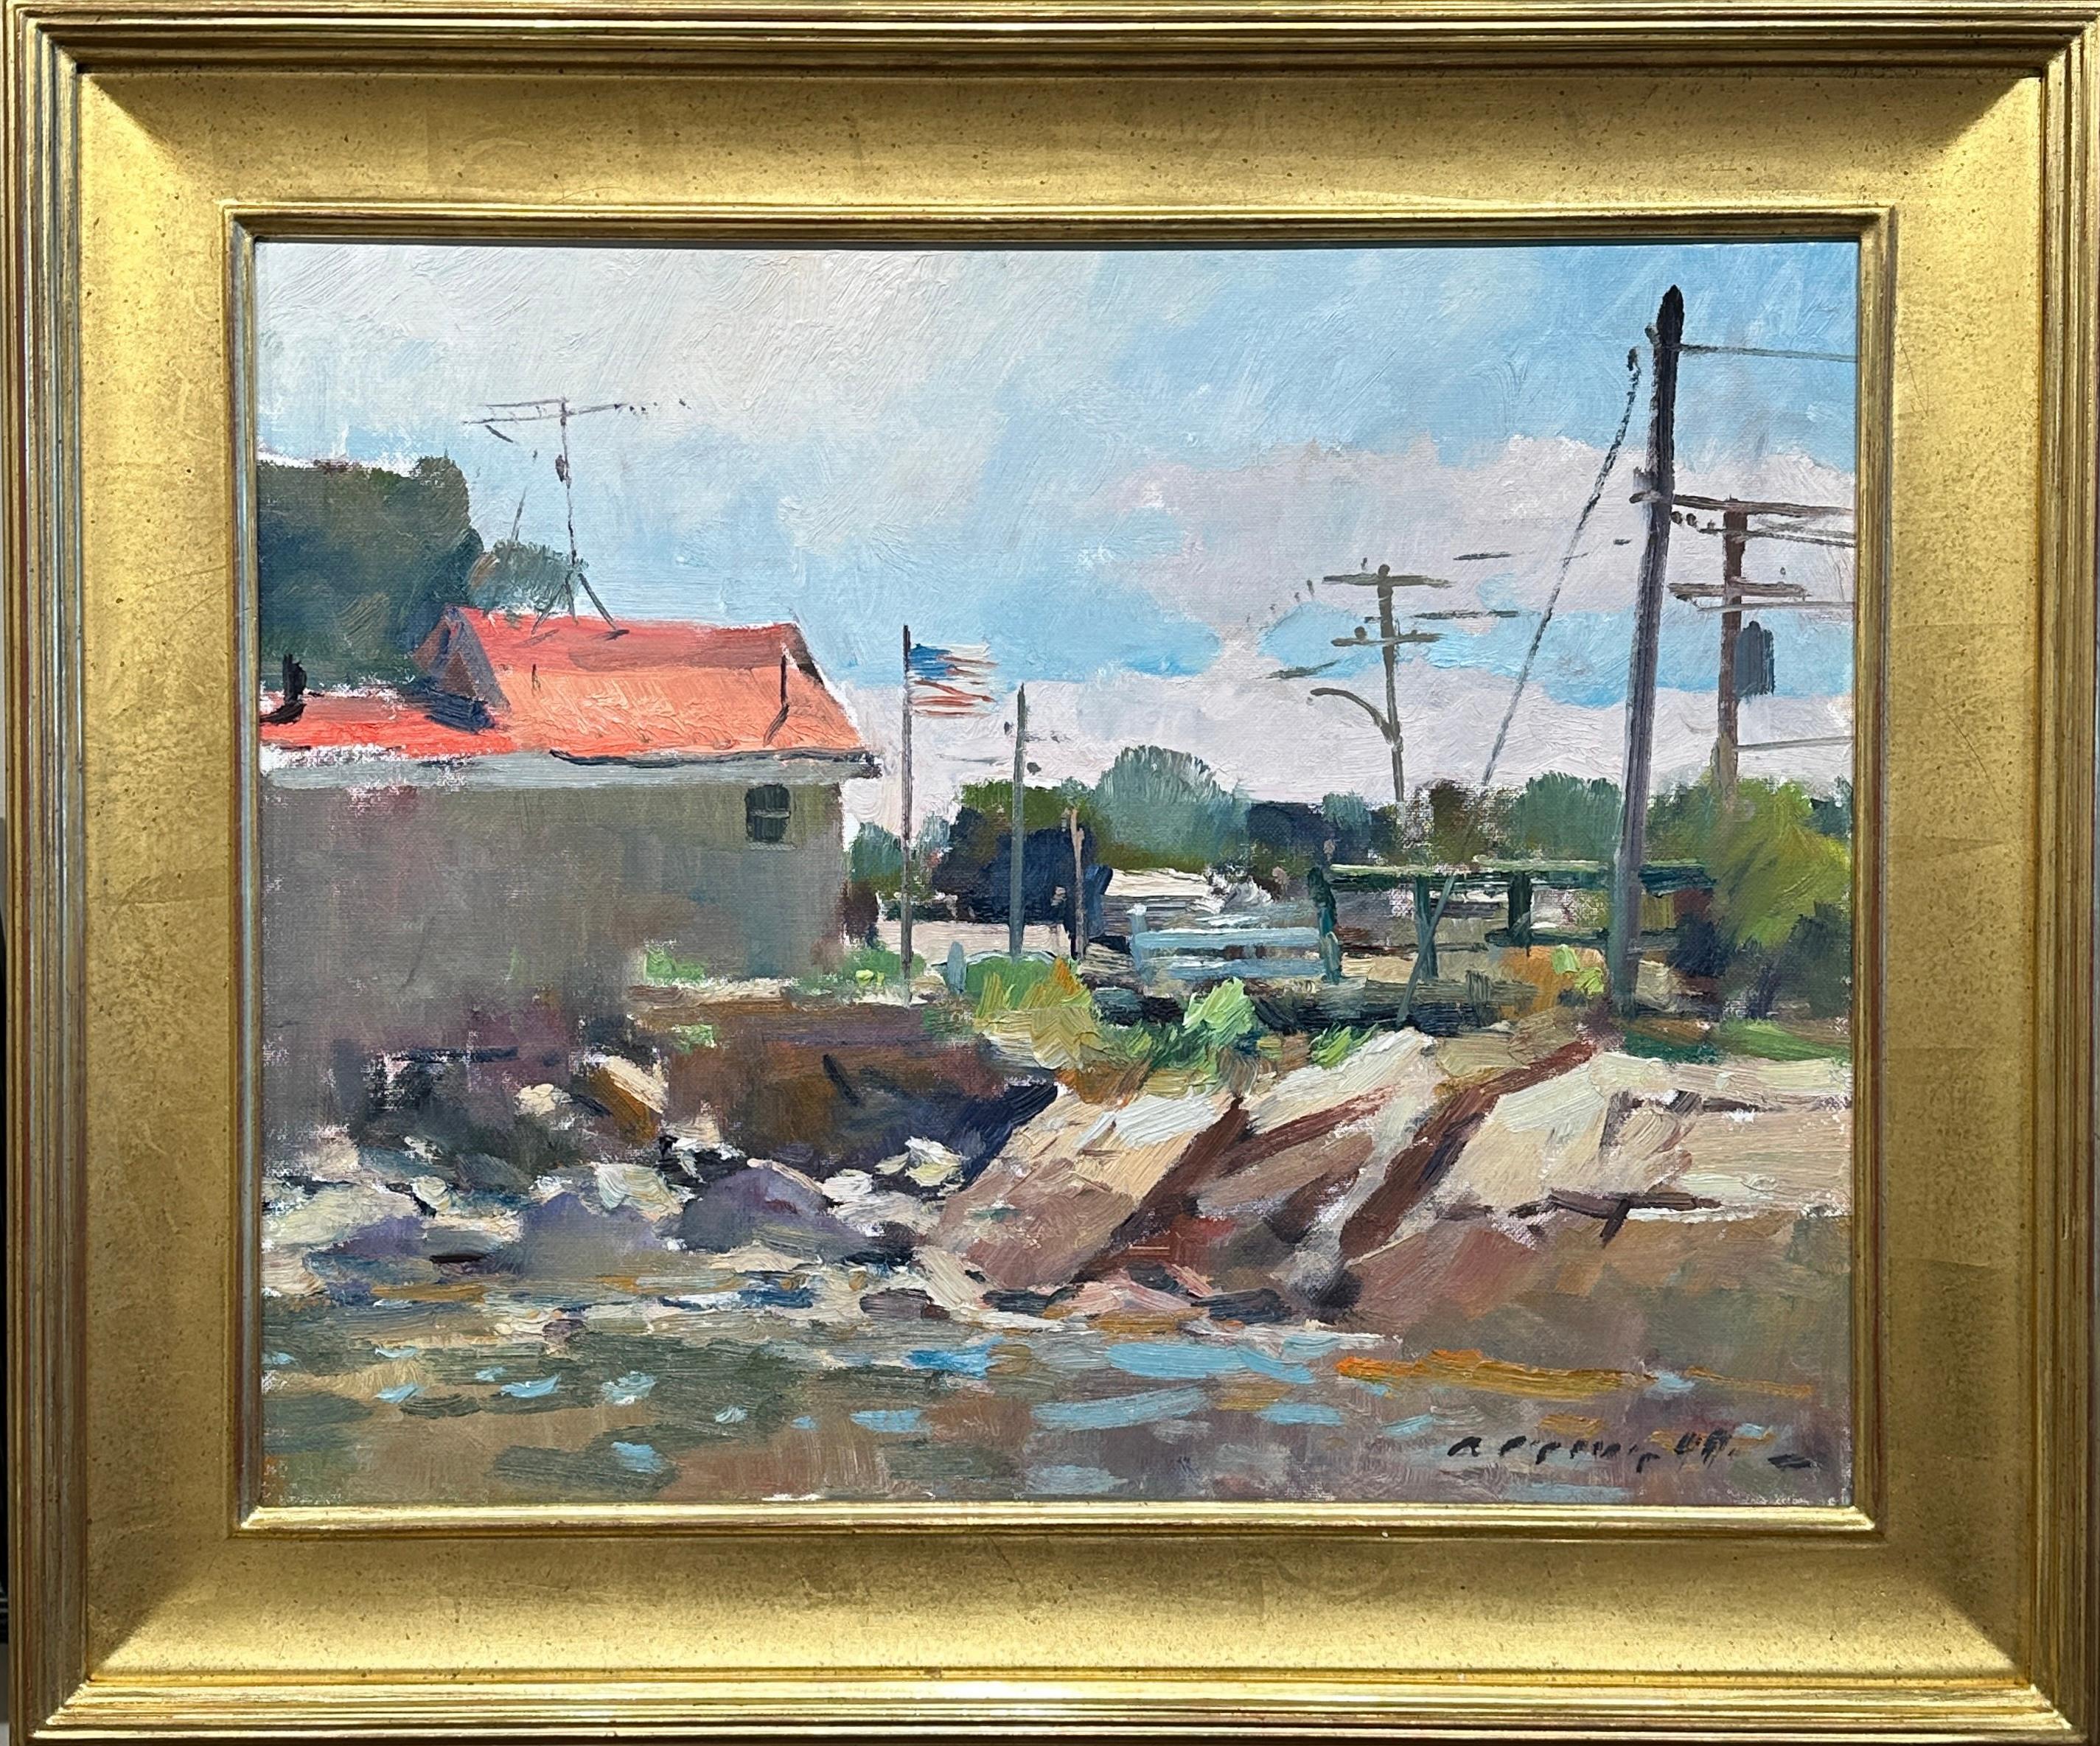 Charles Movalli (1945–2016) had a BA from Clark University and a PhD from the University of Connecticut. He painted and wrote about art for over thirty years. He belonged to the North Shore Arts Association, the Rockport Art Association, The Guild